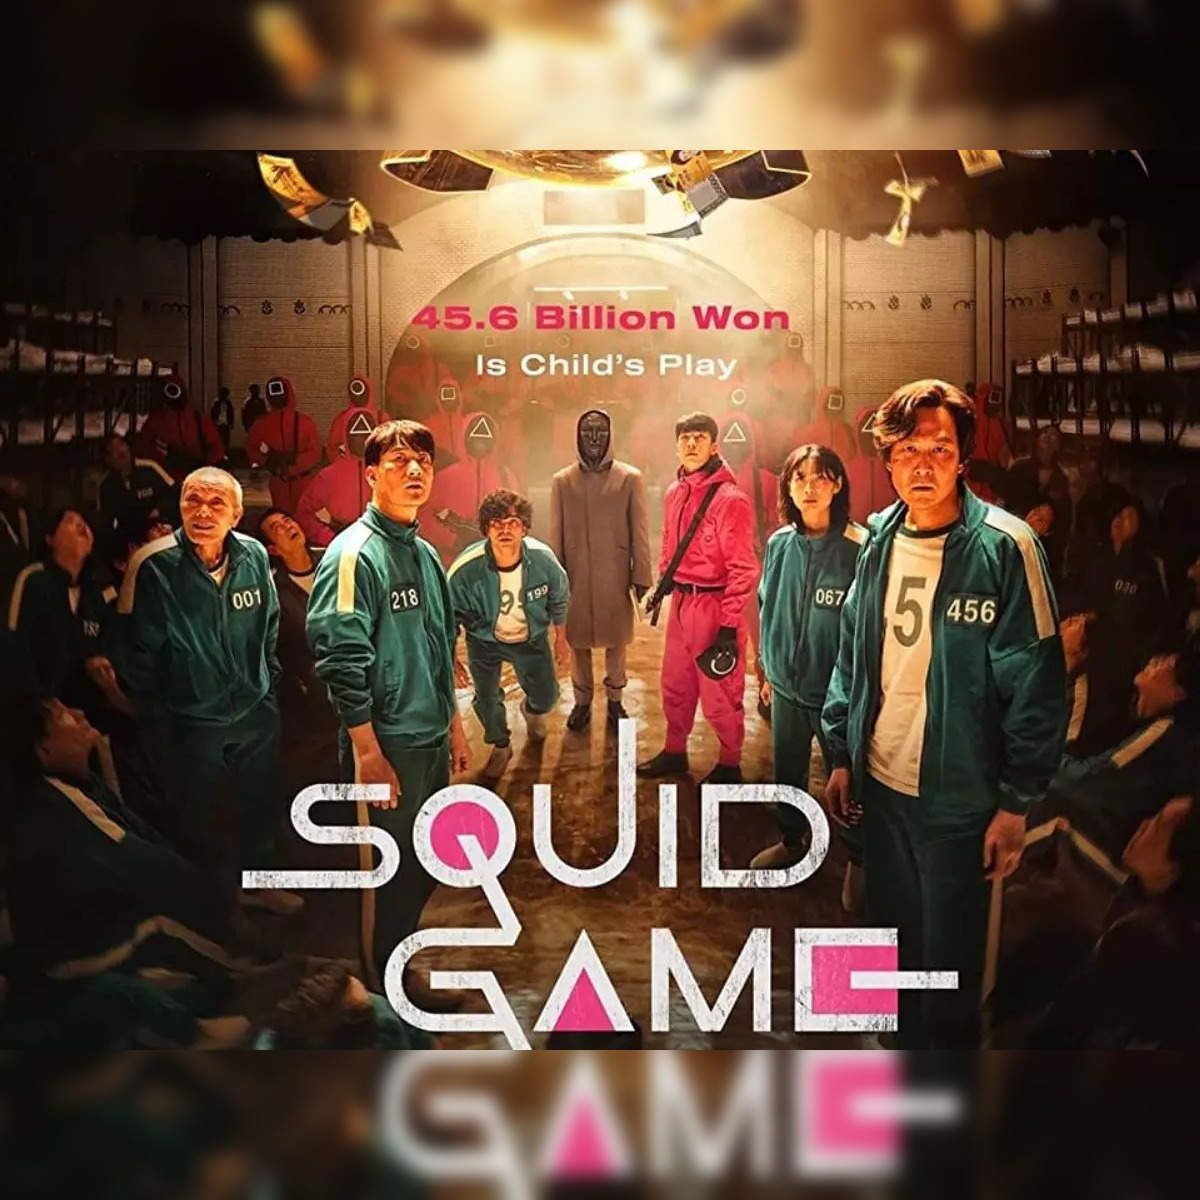 Squid Game: The Challenge release schedule - When final episode airs